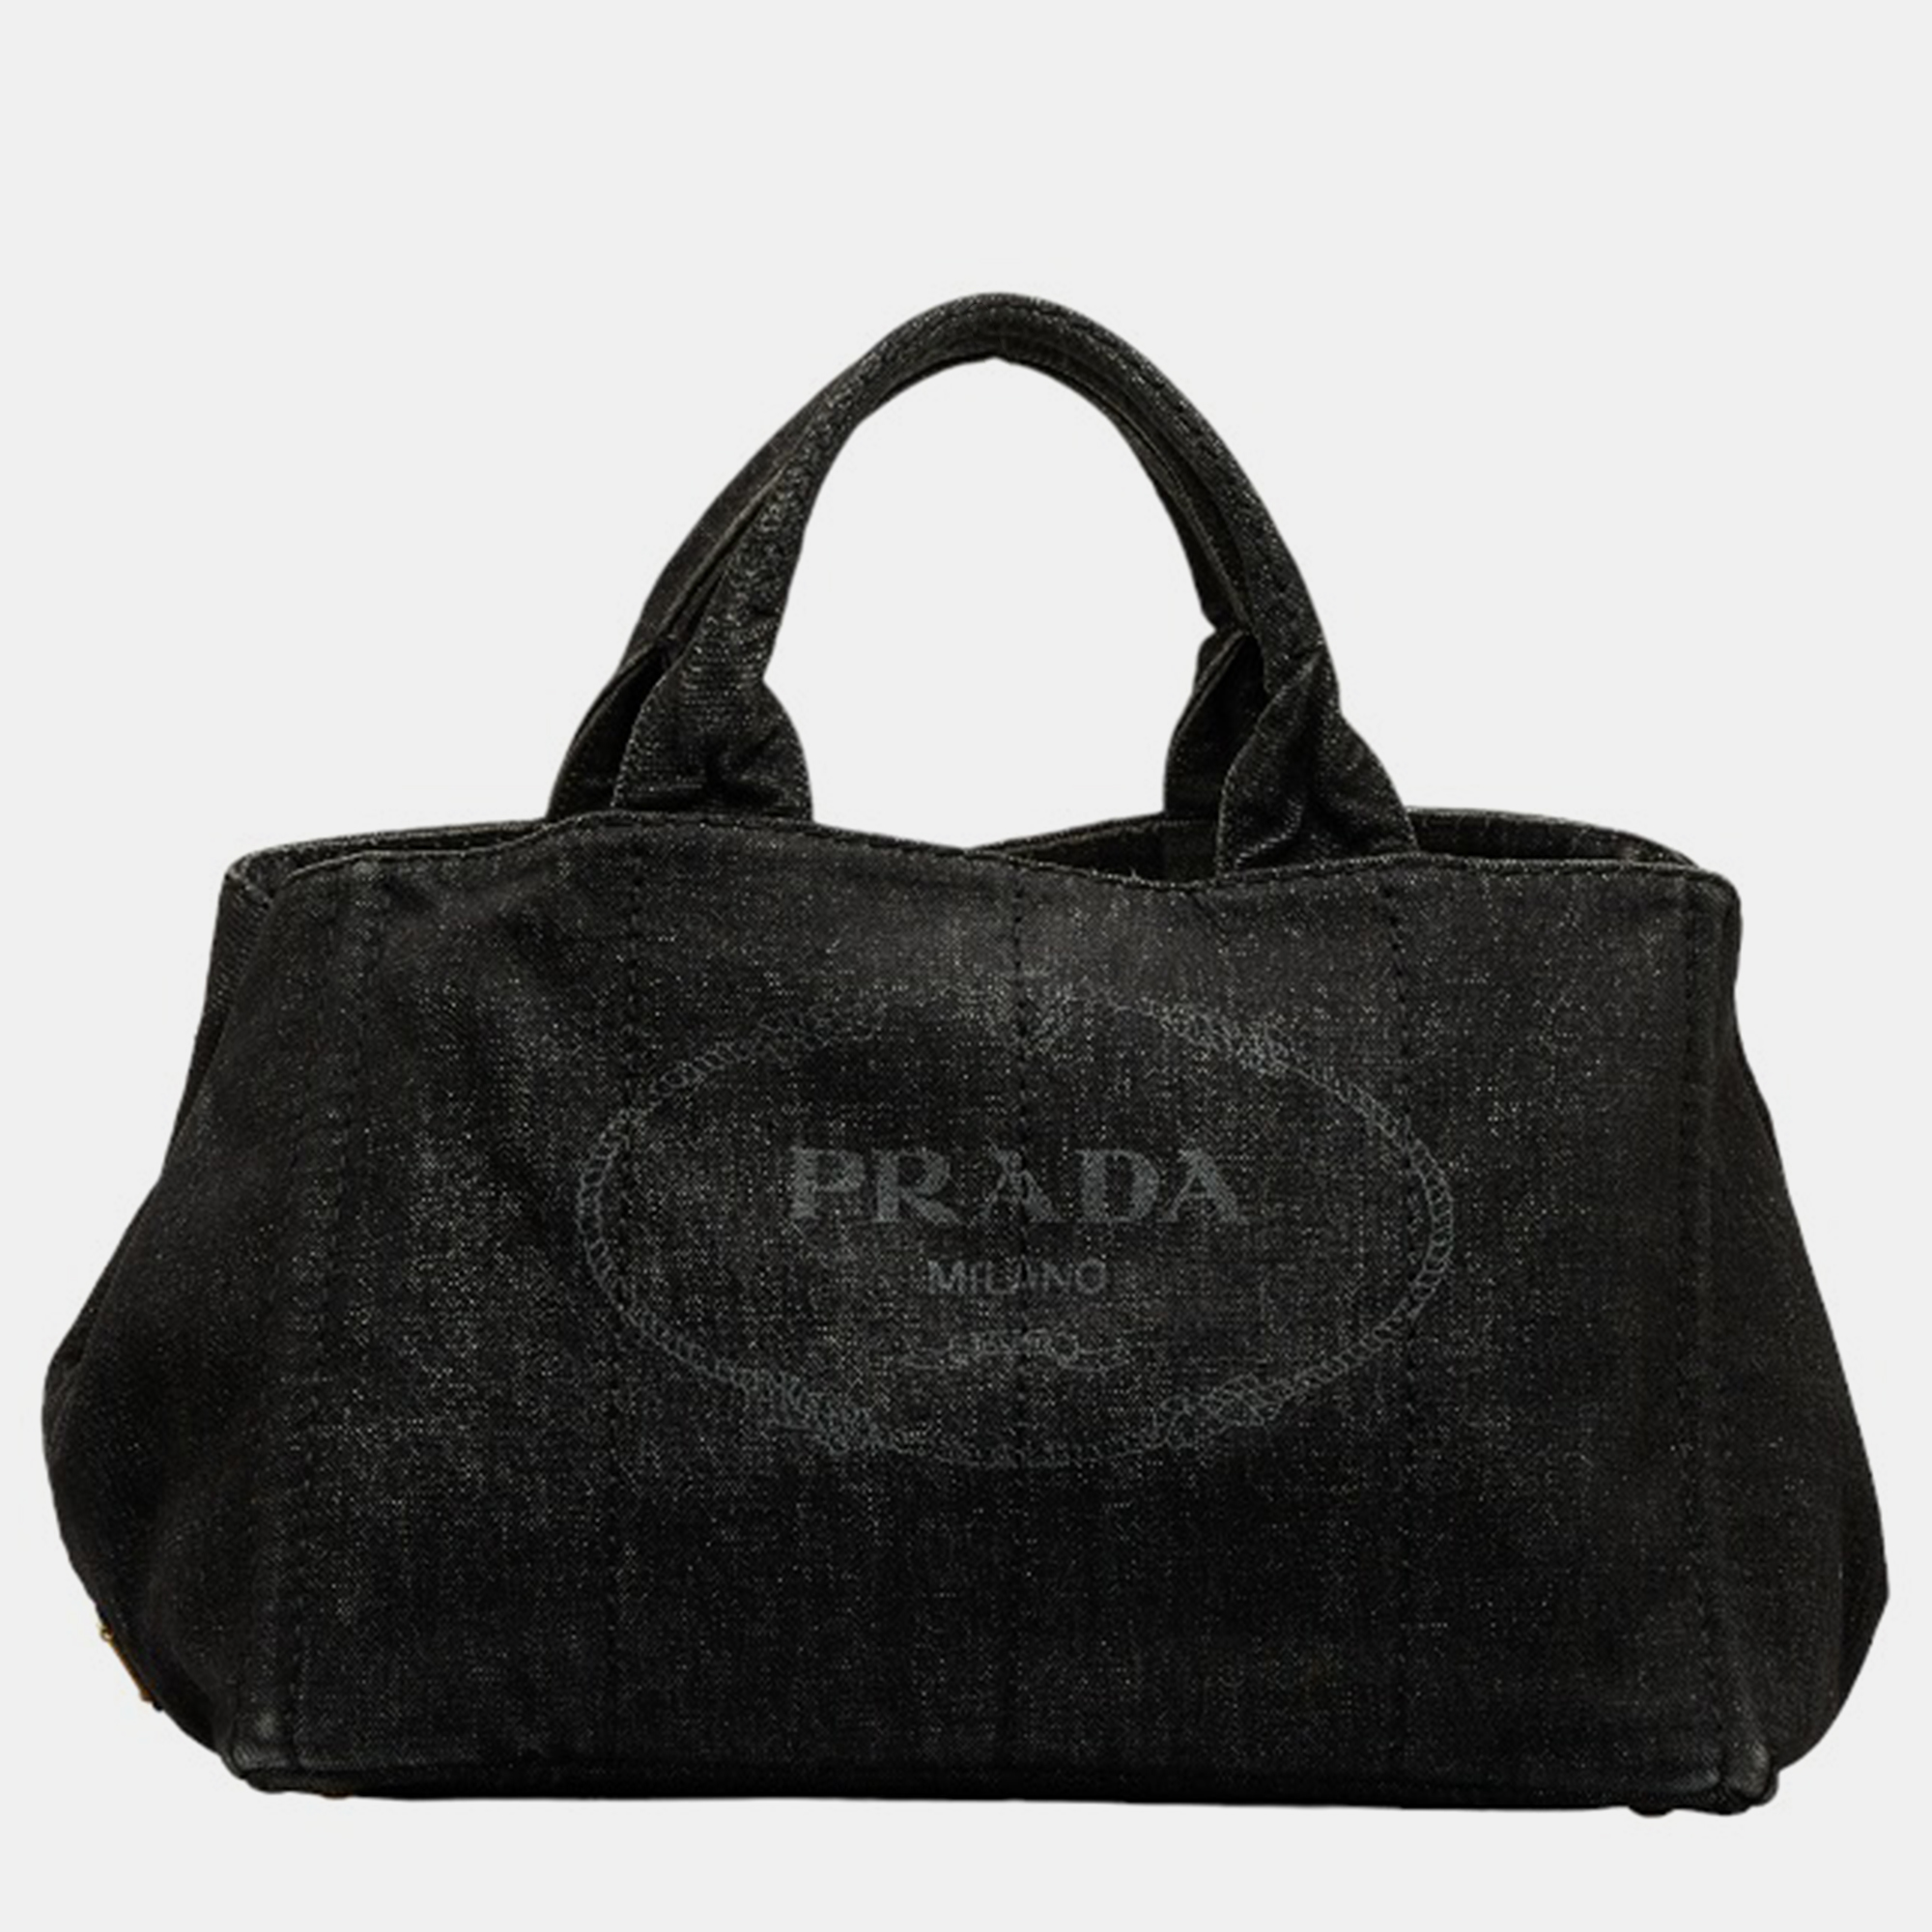 Elevate your every day with this Prada tote. Meticulously designed it seamlessly blends functionality with luxury offering the perfect accessory to showcase your discerning style while effortlessly carrying your essentials.